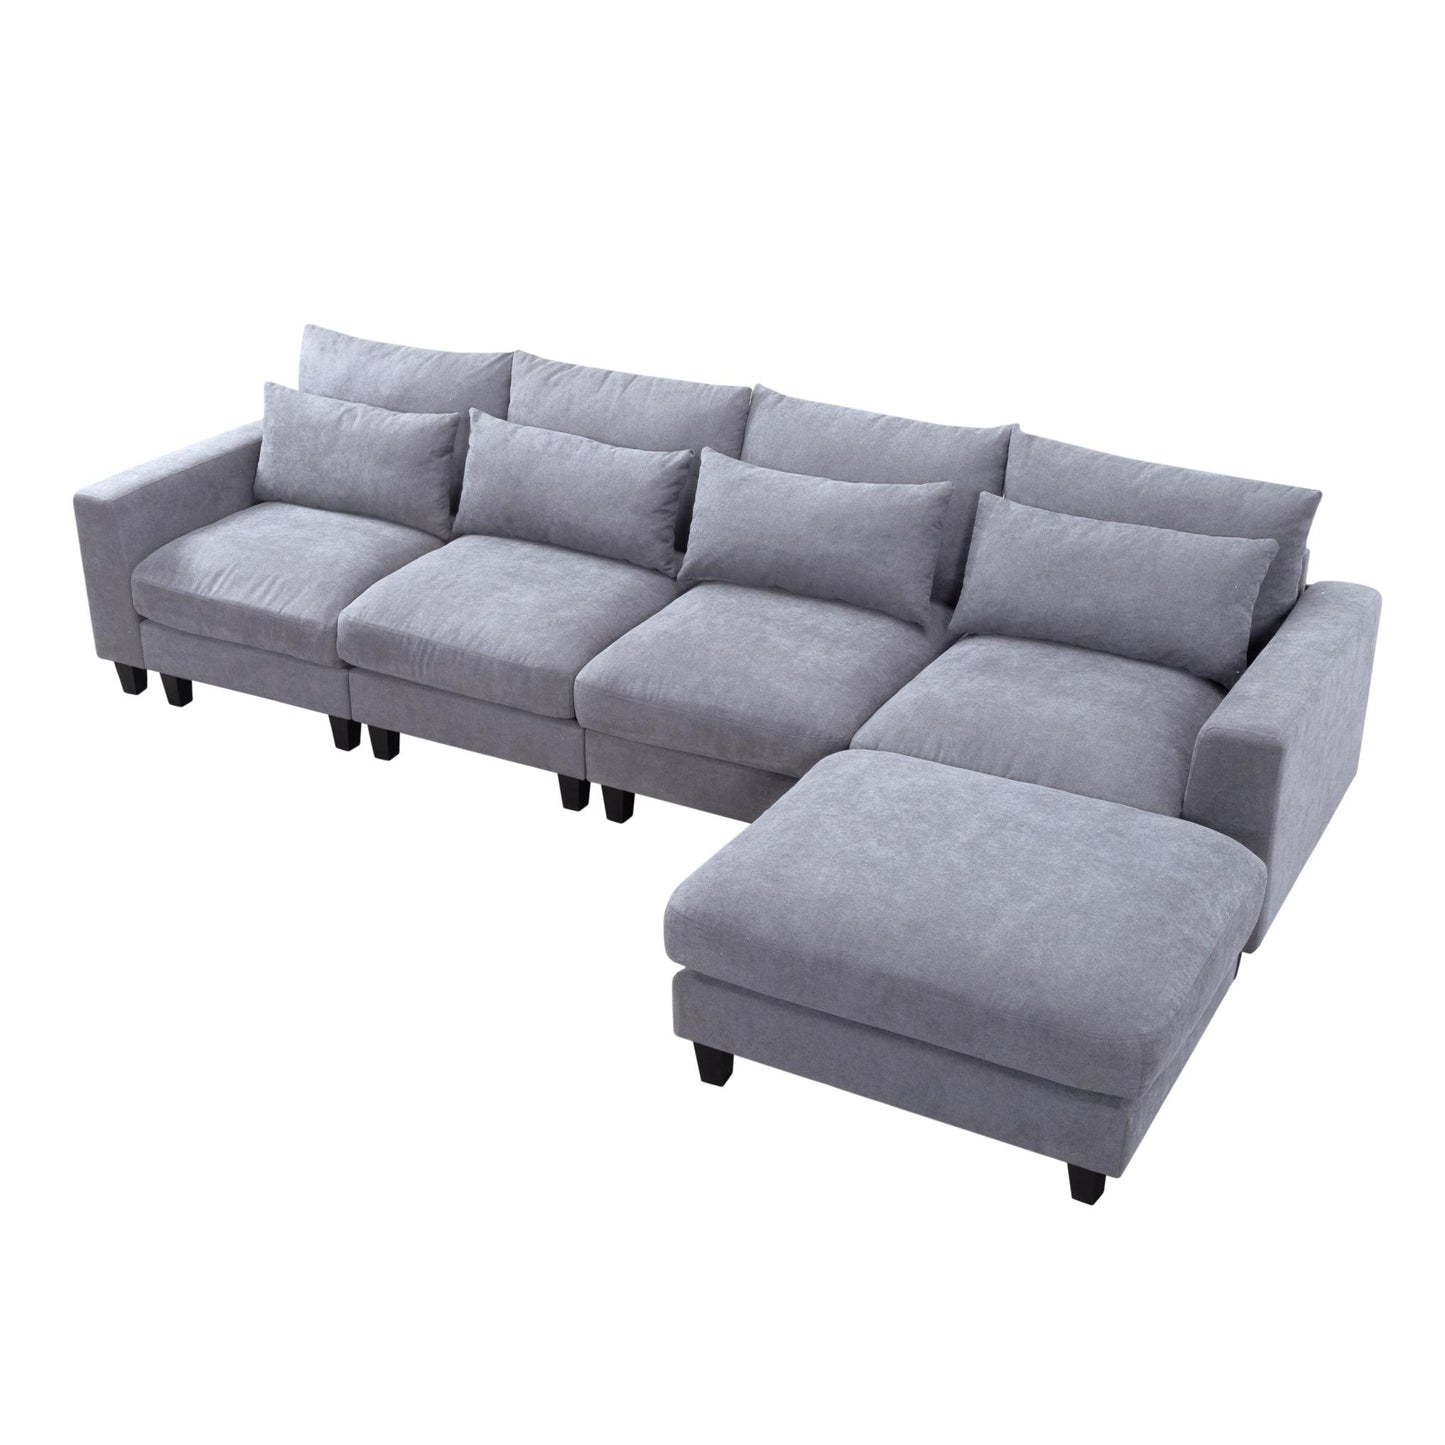 Contemporary Comfort L-Shaped Sectional Sofa with Ottoman